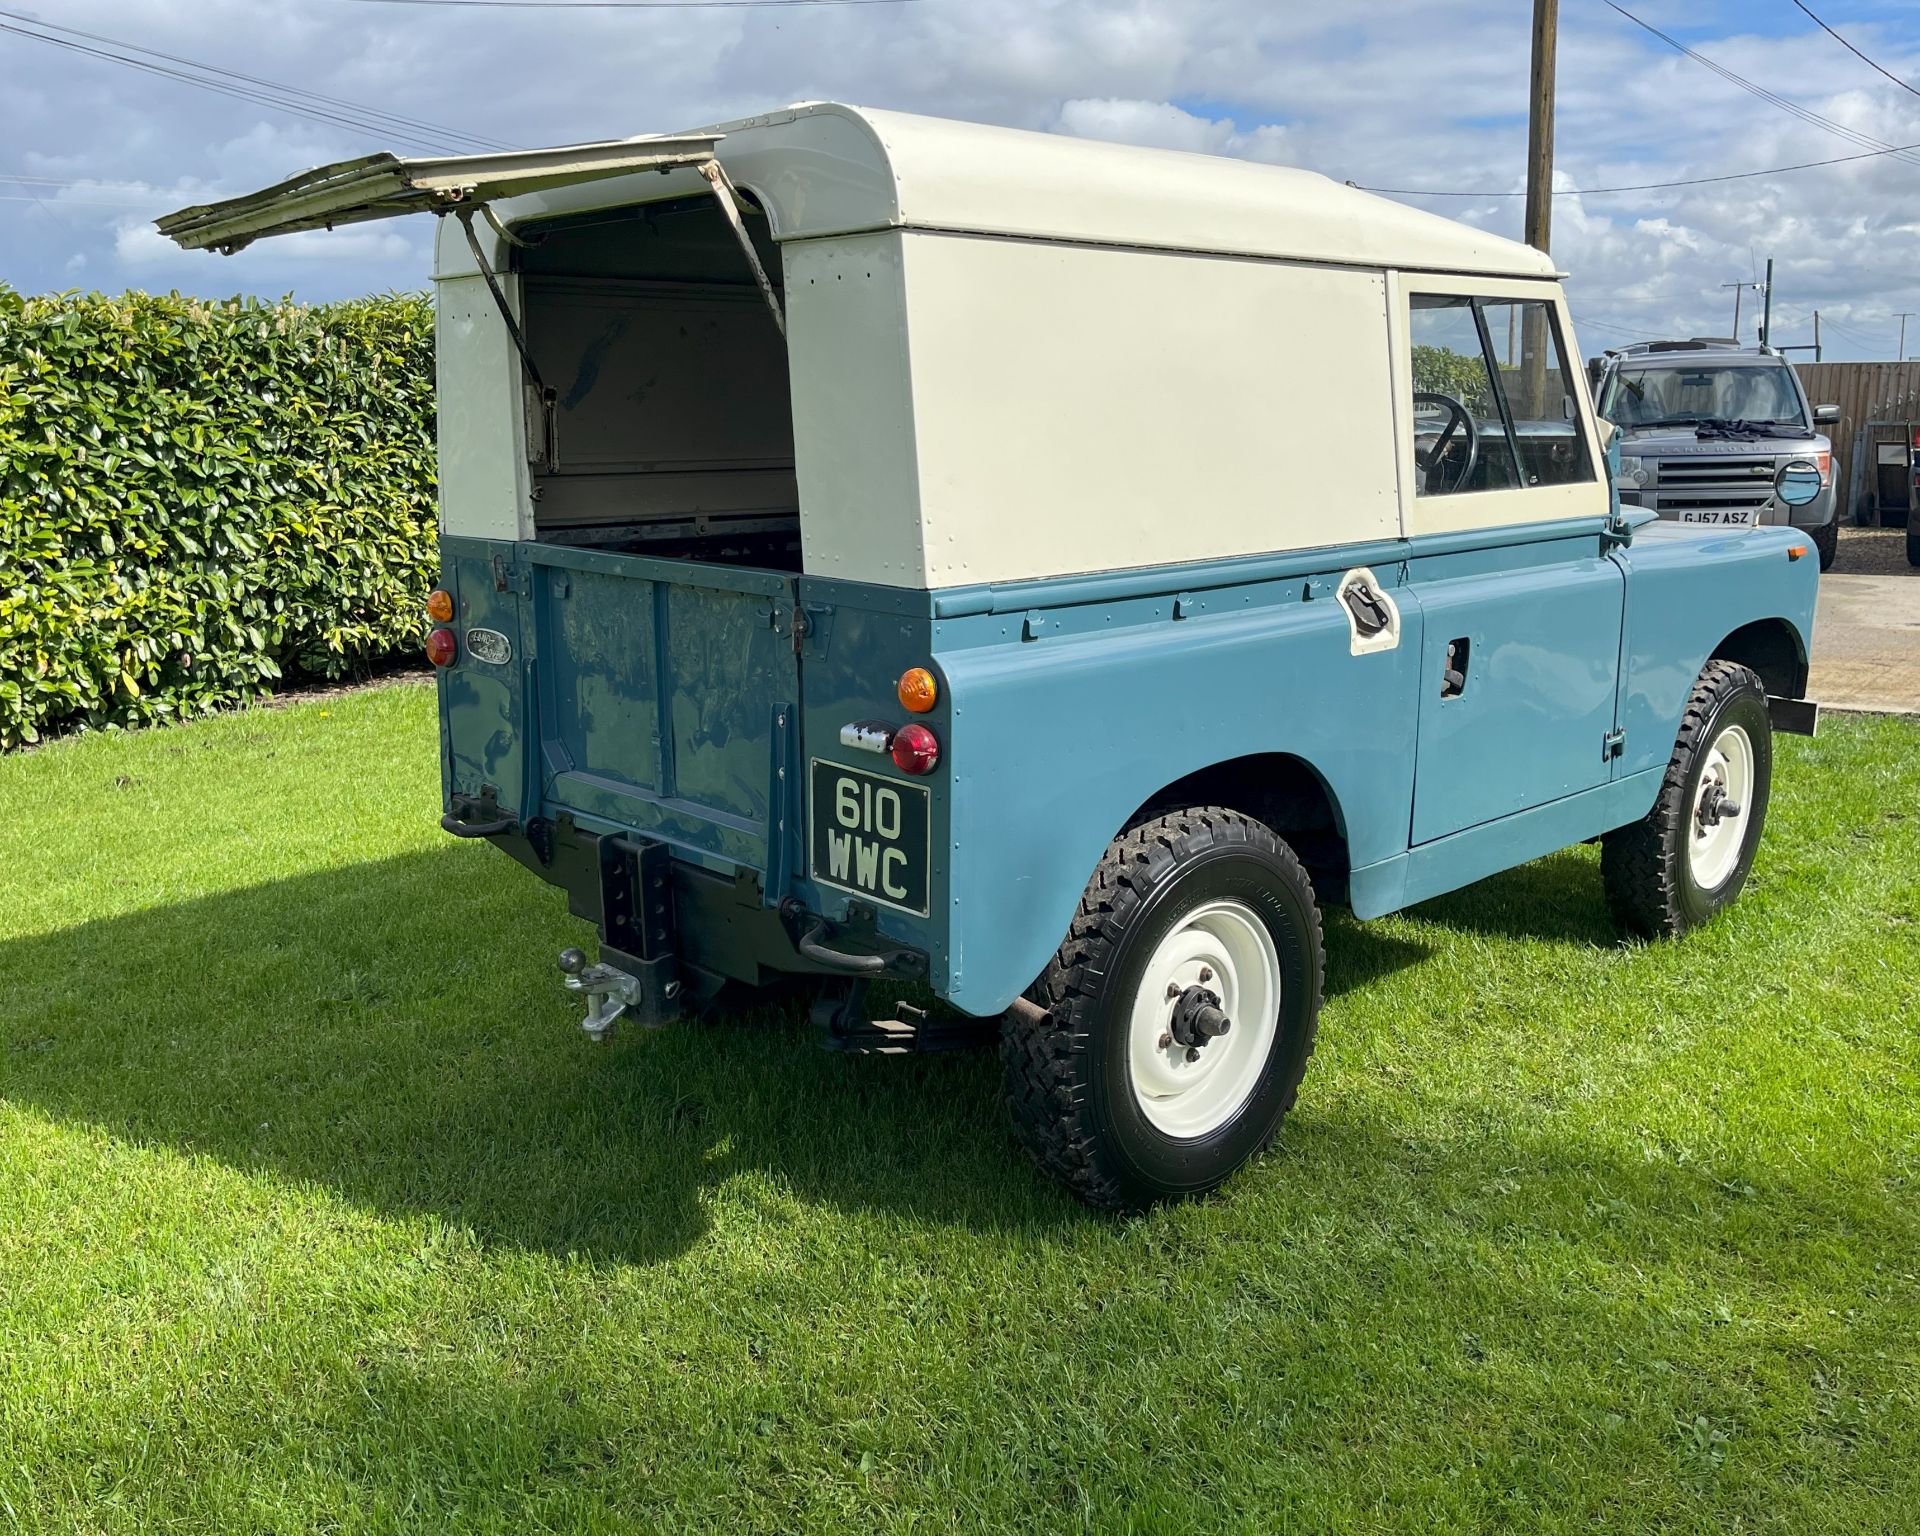 1962 Land Rover 88 Series II, petrol 2.25 litre engine, blue with 64,078 showing on the milometer, - Image 7 of 14